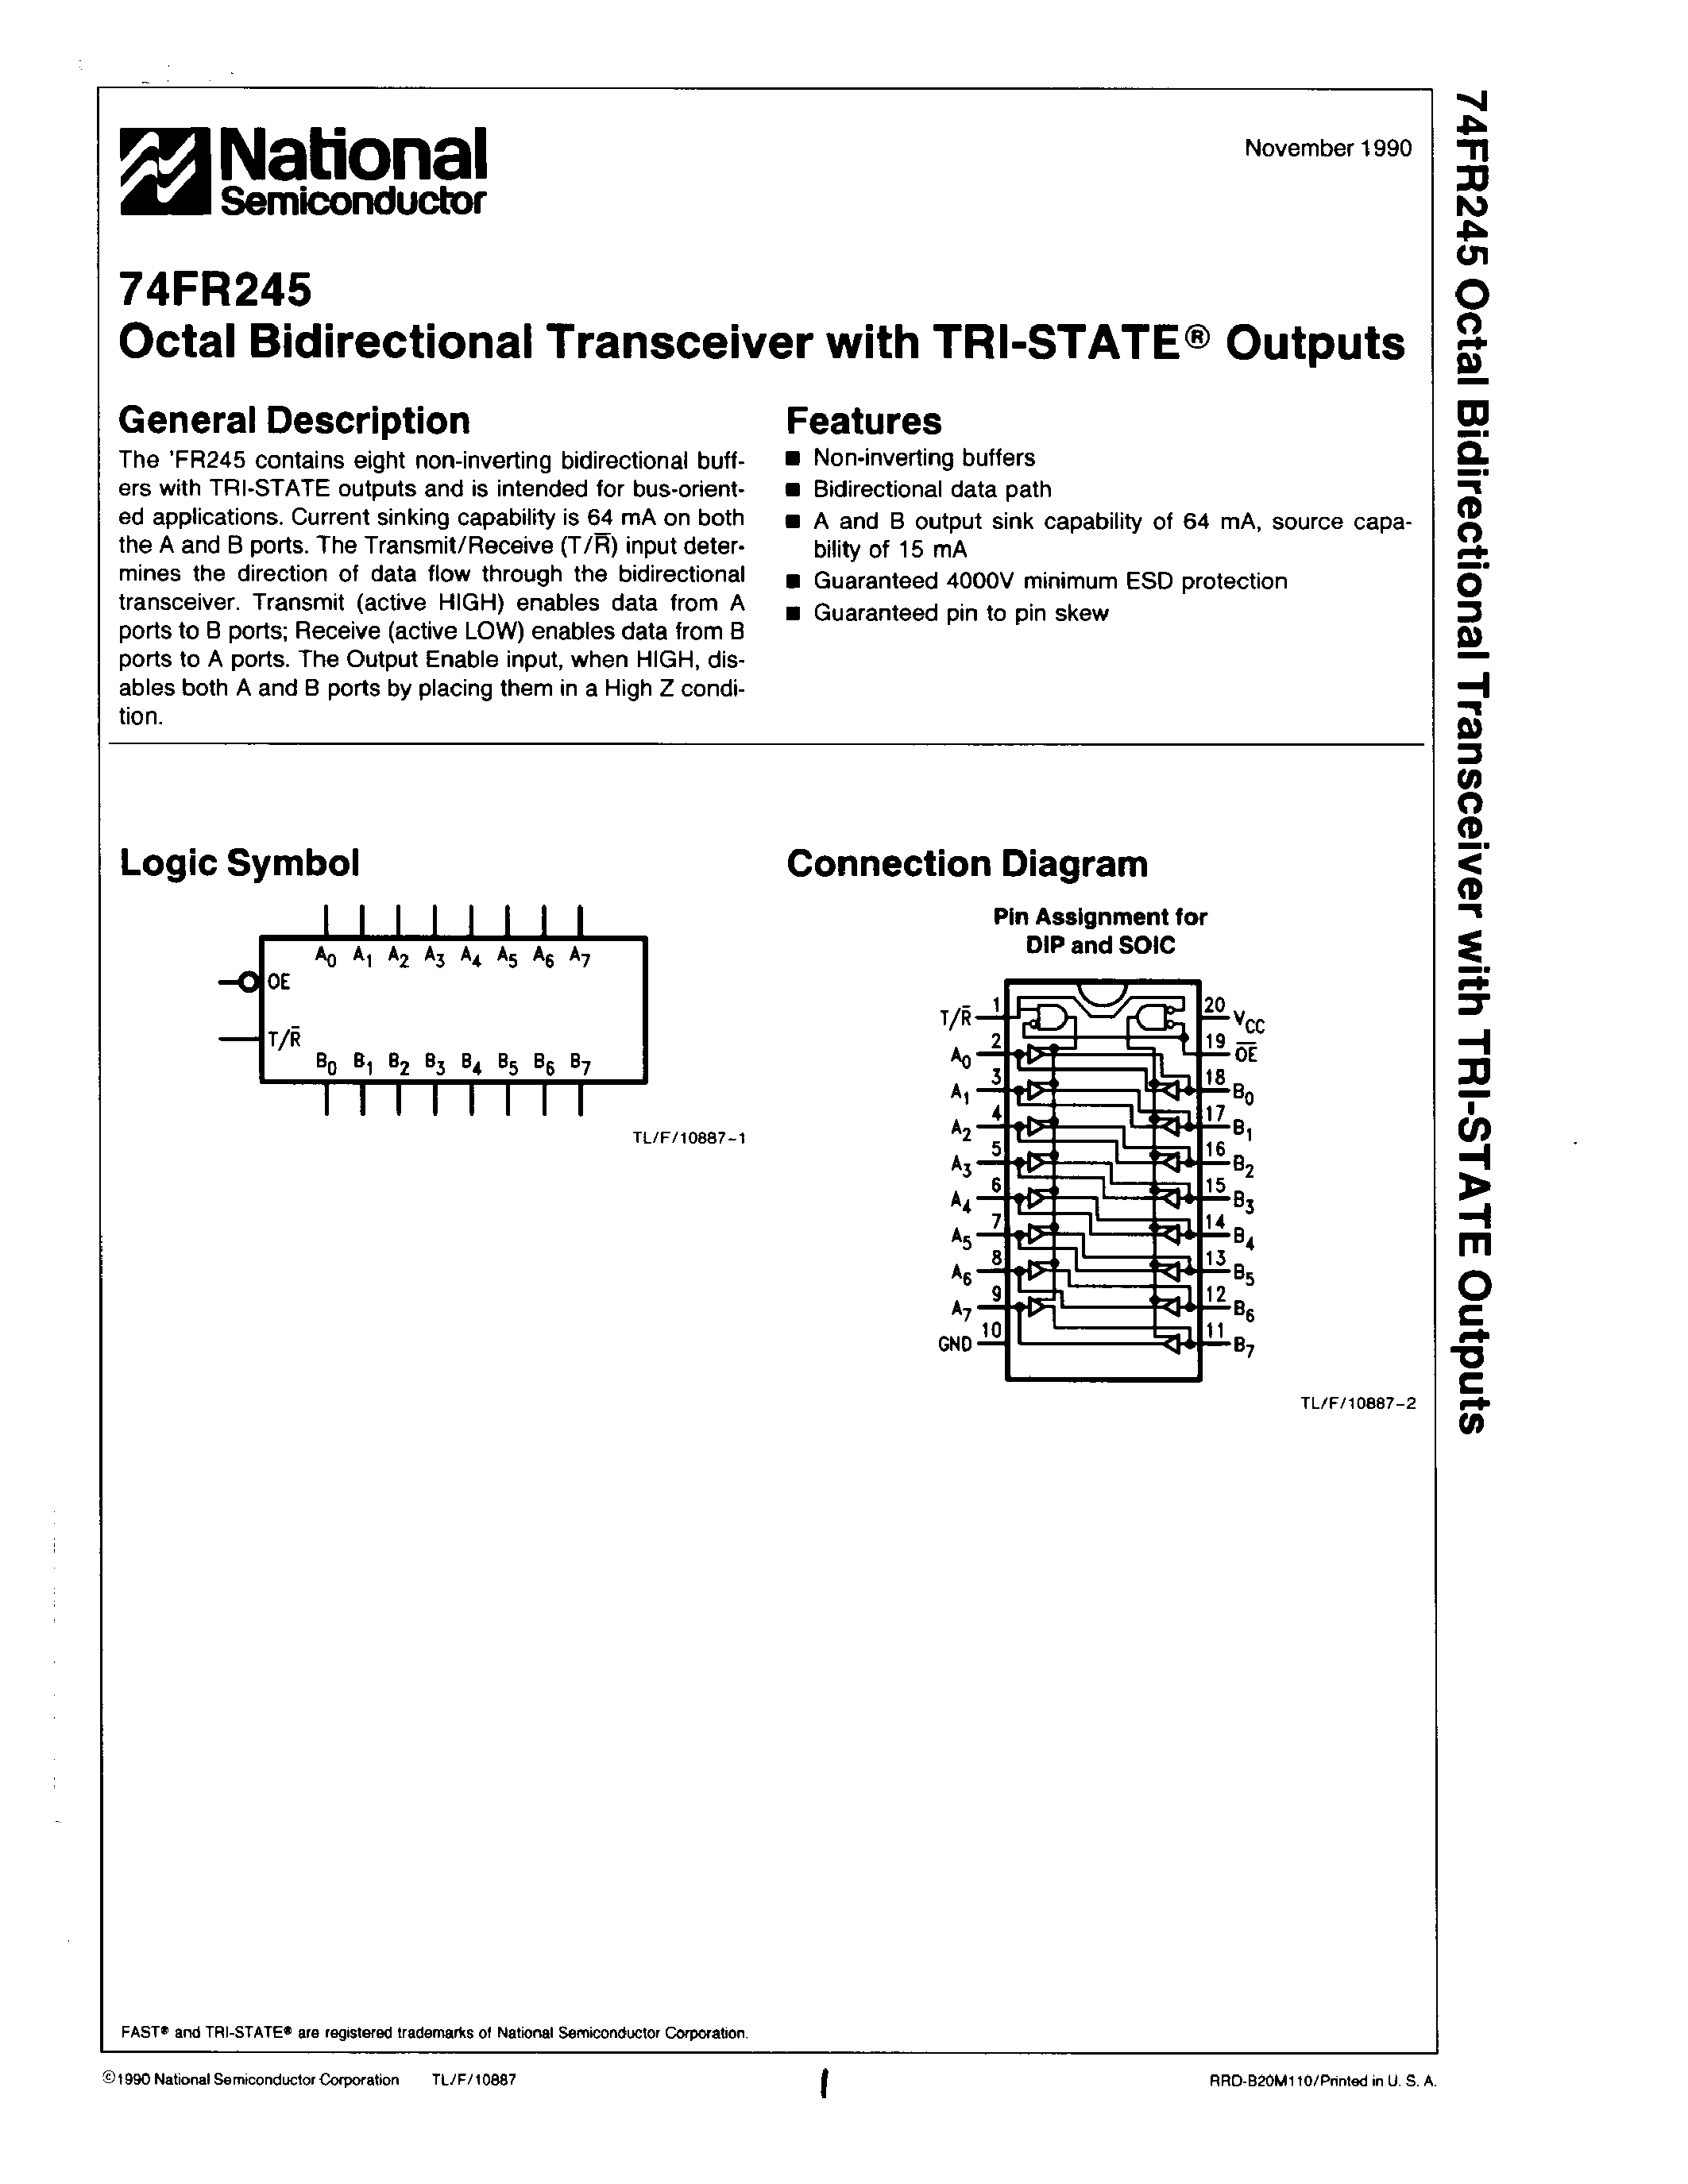 Даташит 74FR245S-Octal Bidirectional Transceiver with TRI-STATE Outputs страница 1